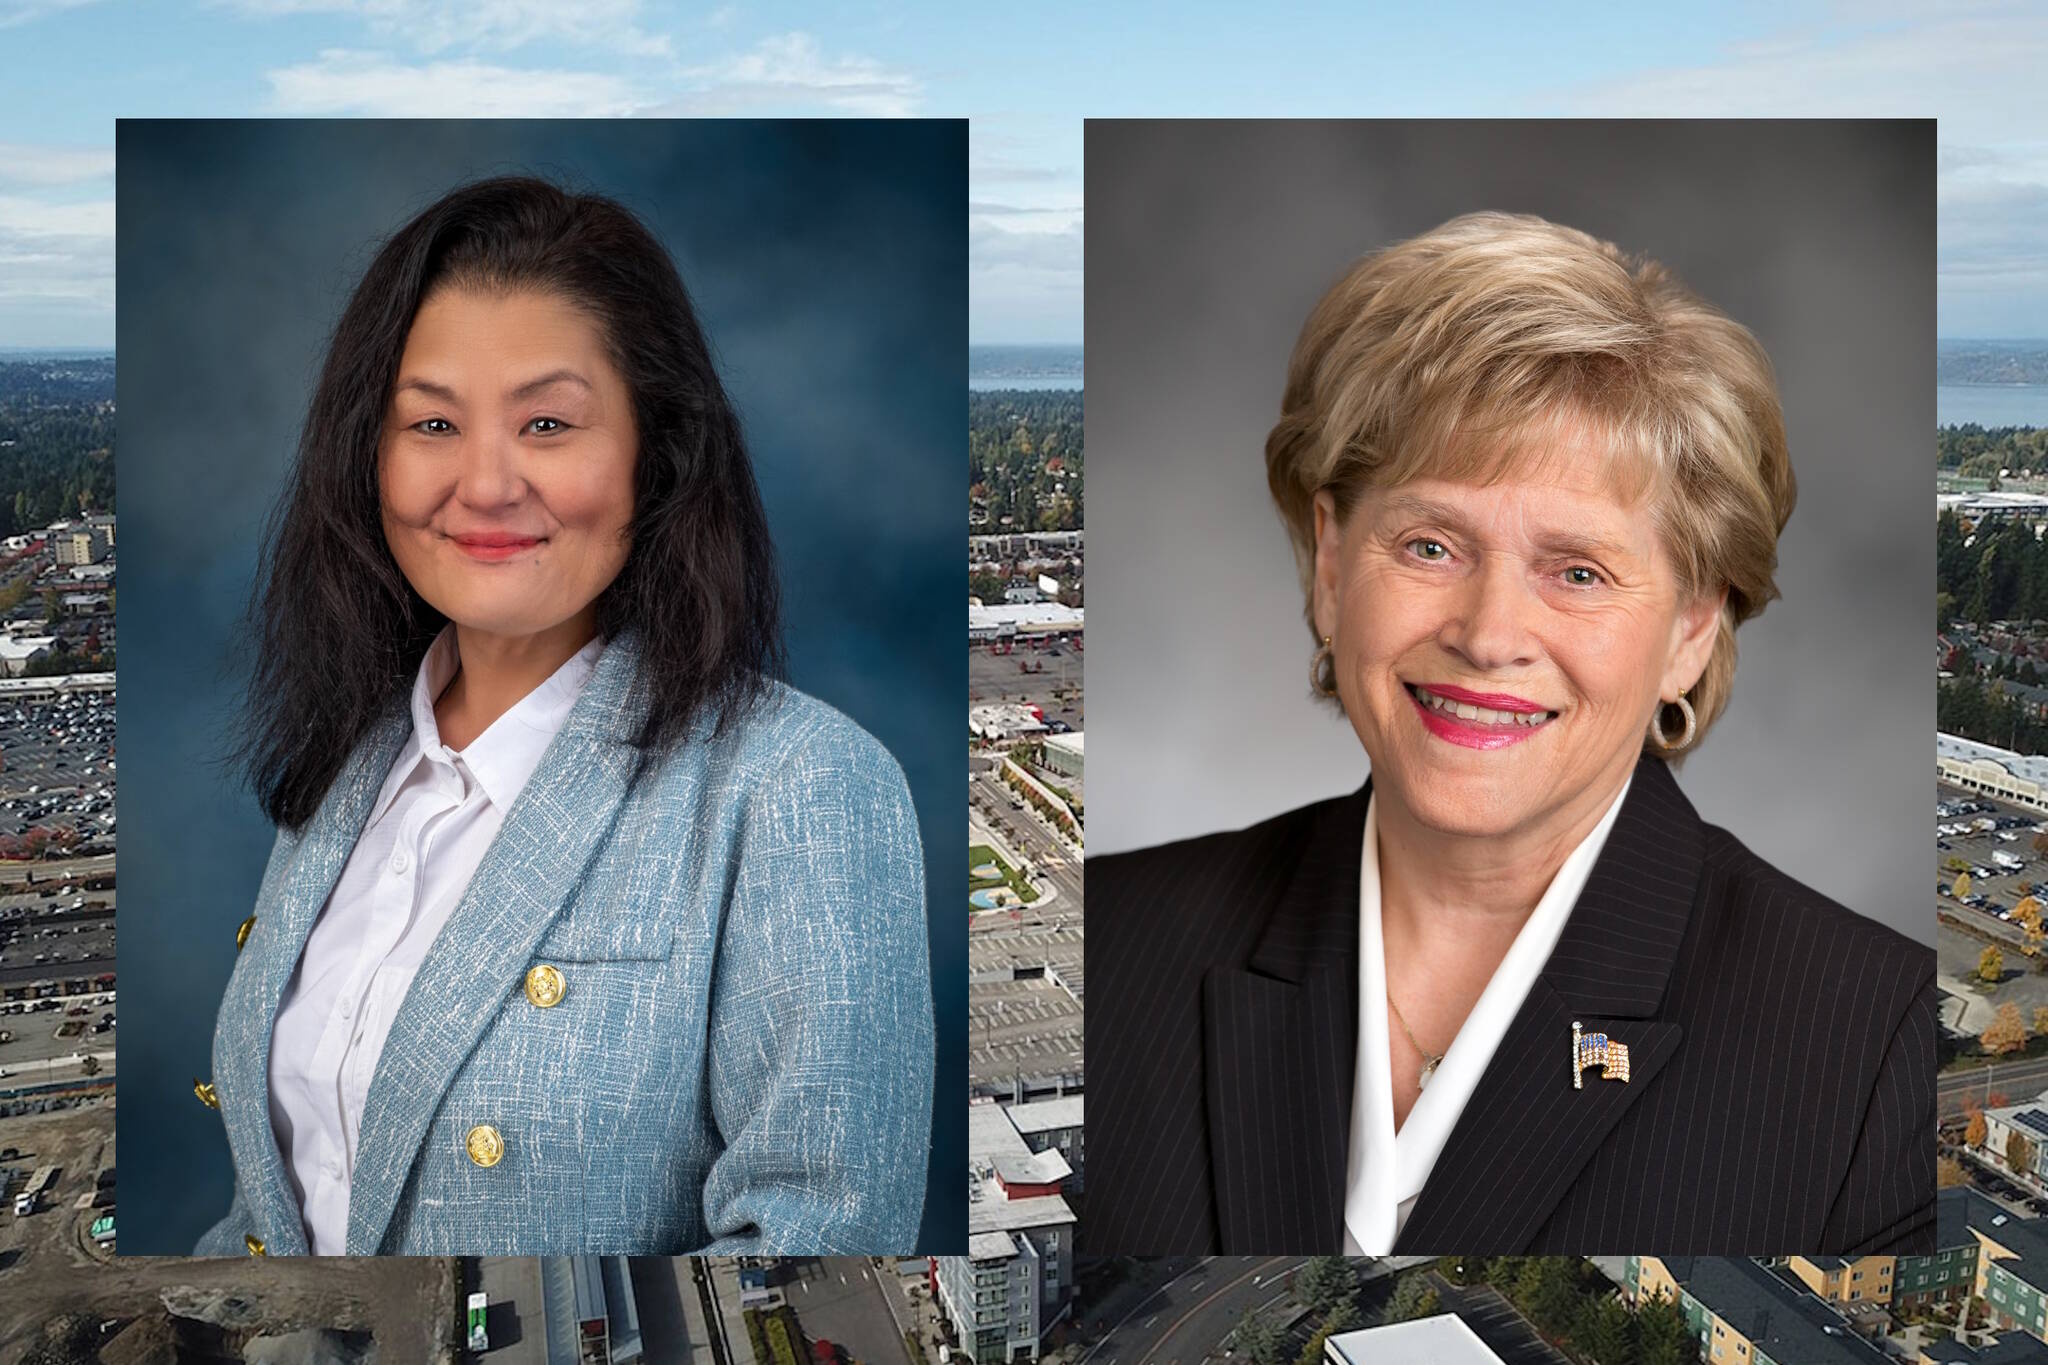 Denise Yun, left, is running against incumbent Federal Way City Councilmember (Position 7) Linda Kochmar, who is also the current council president. (File photos)